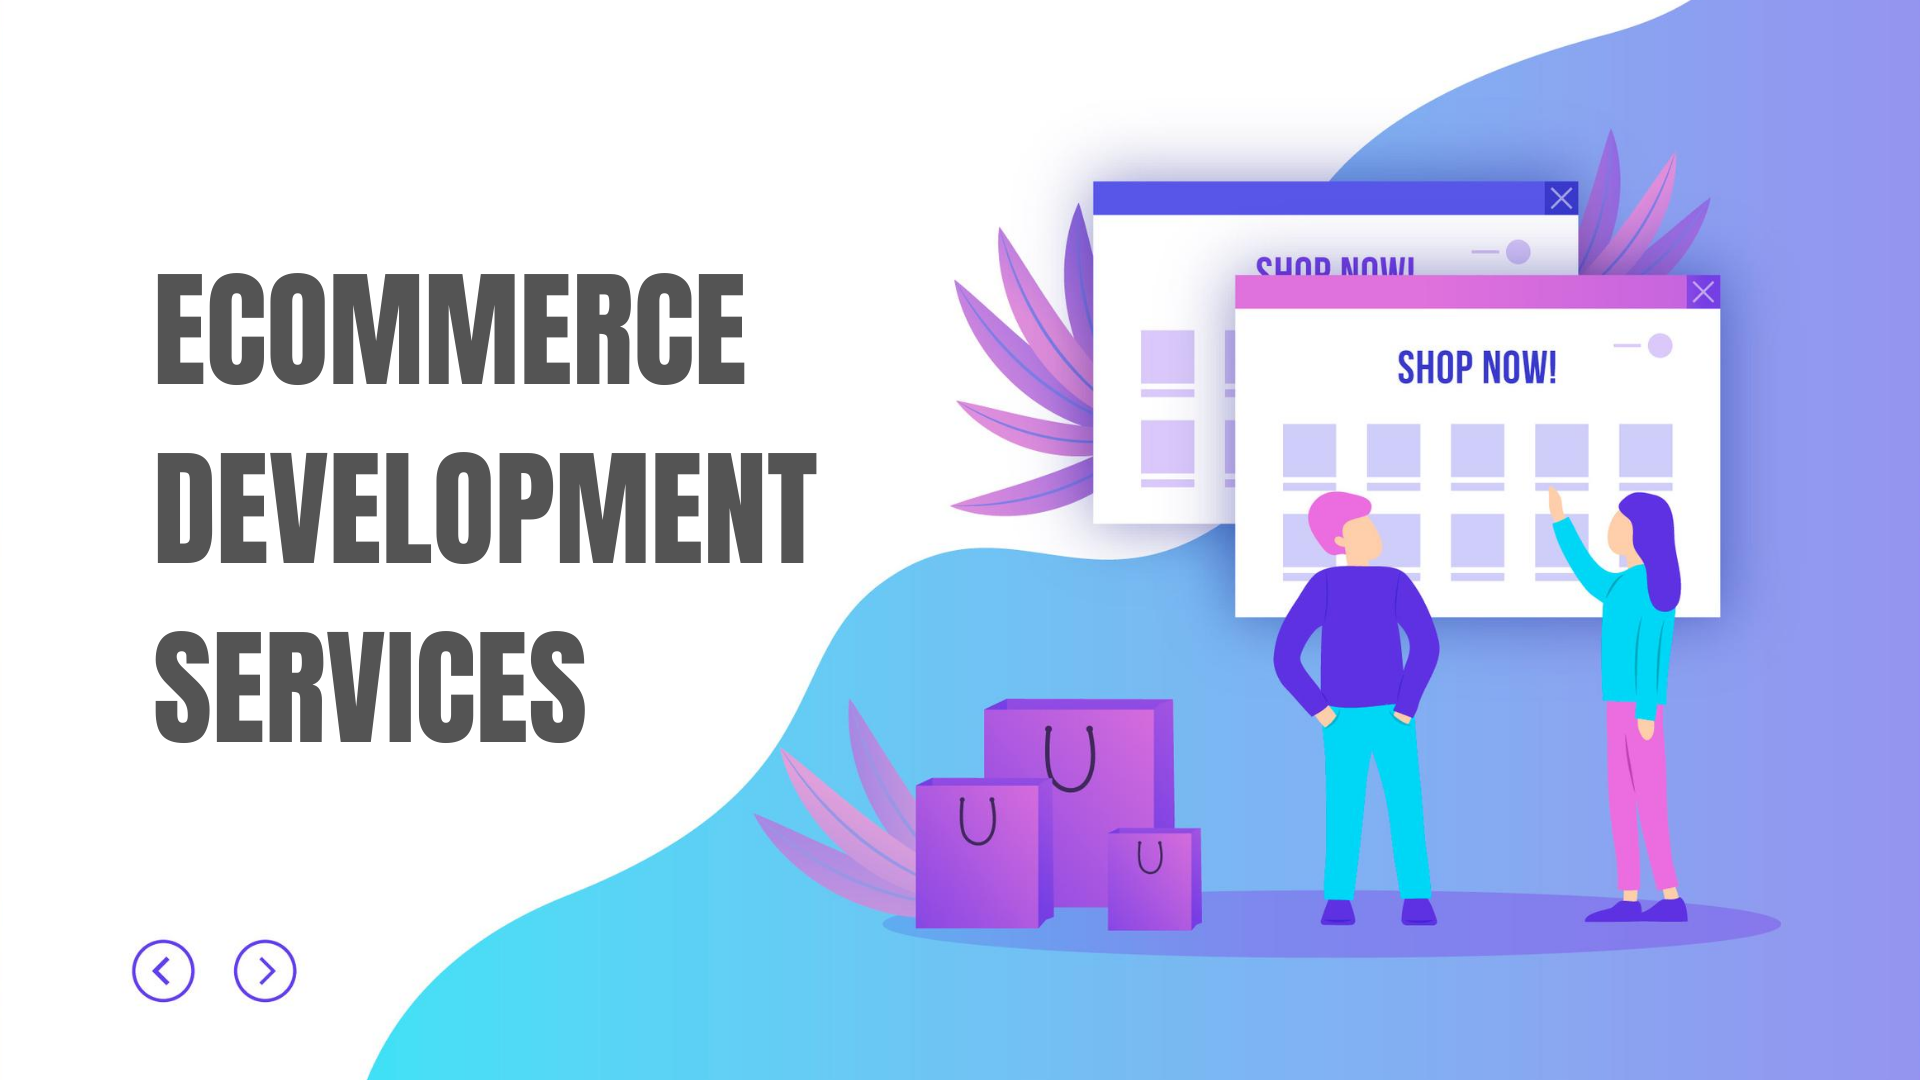 What are the Benefits of E-commerce Development Solutions?